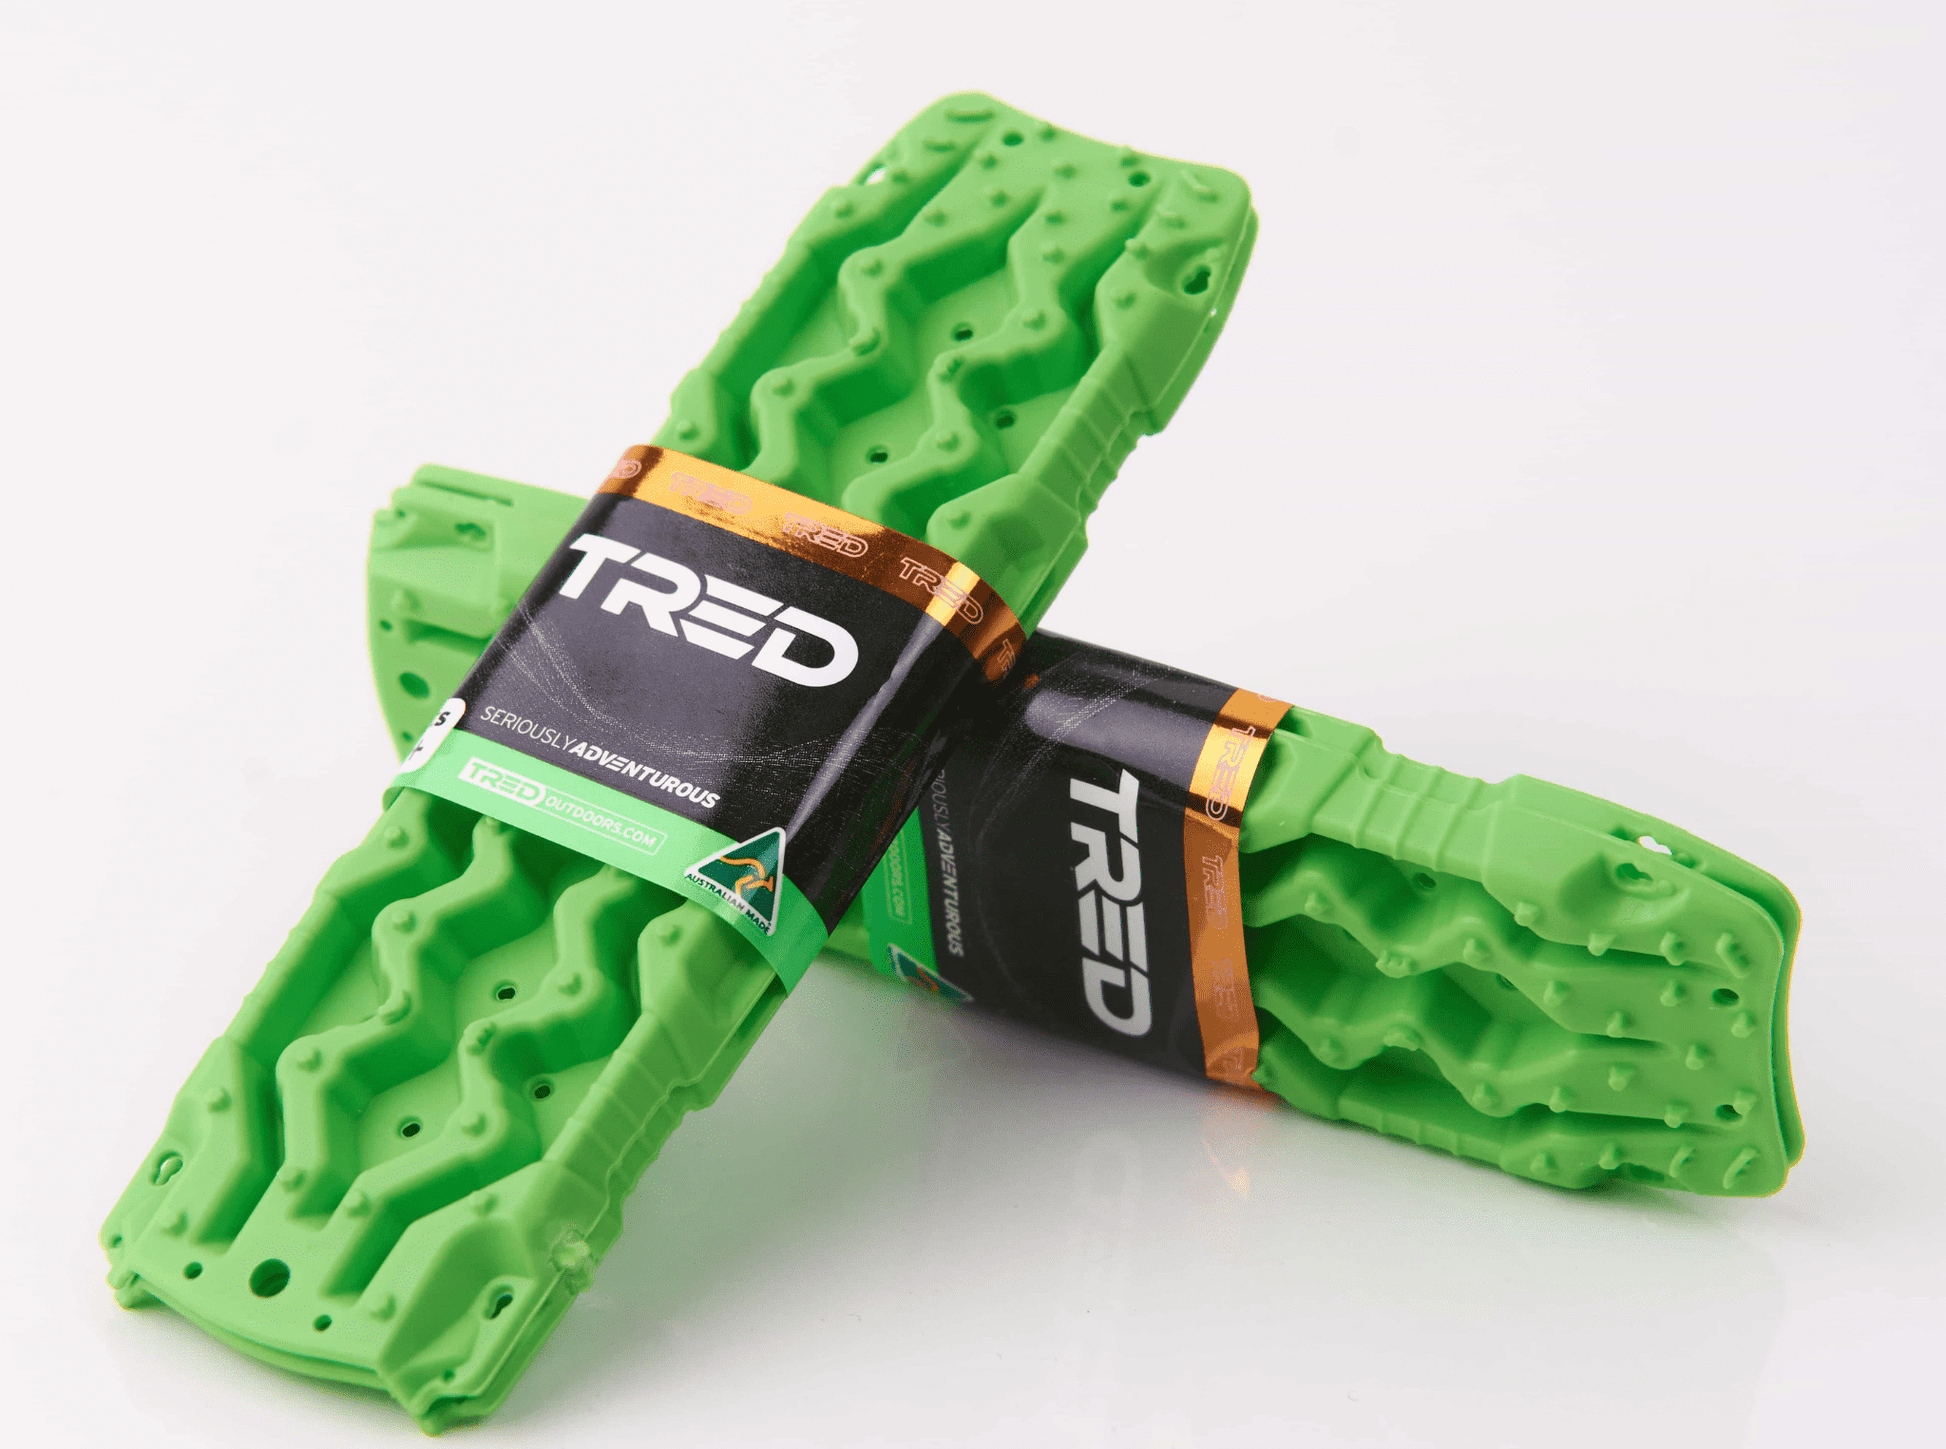 TRED - TRED Minis 1:10 Scale - Green